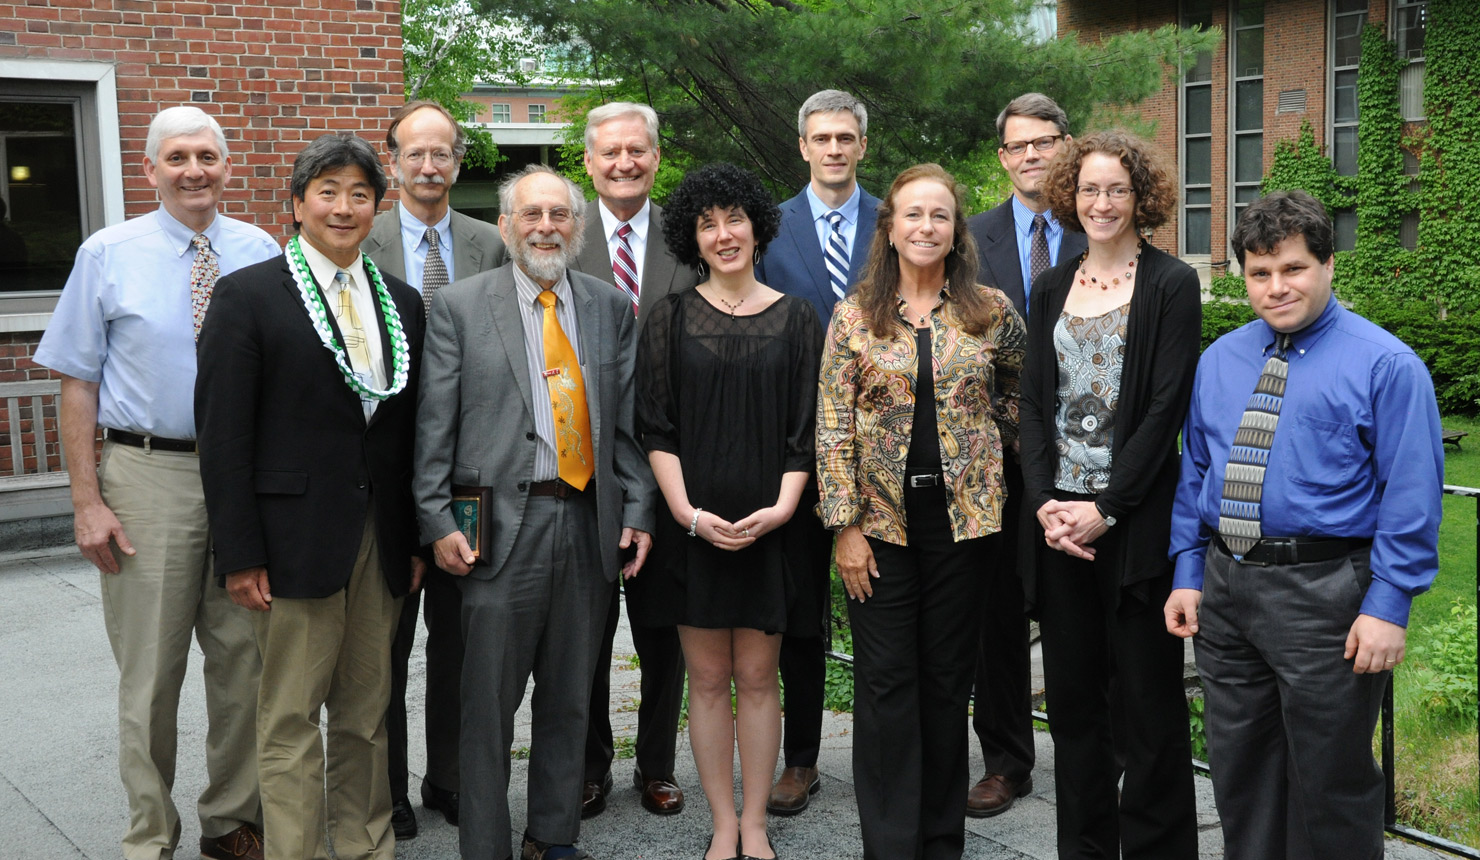 The 2015 Geisel Academy of Master Educators honorees. Back row (left to right): Peter A. Mason, Cantwell Clark, Oglesby H. Young, John Dick, Hugh F. Huizenga. Front row (left to right): Alan T. Kono, Harold M. Swartz, Sharona Sachs, Sarah G. Johansen, Kelly A. Keiffer, and Harley P. Friedman. Not pictured: E. Ann Gormley. Photo by Jon G. Fox.